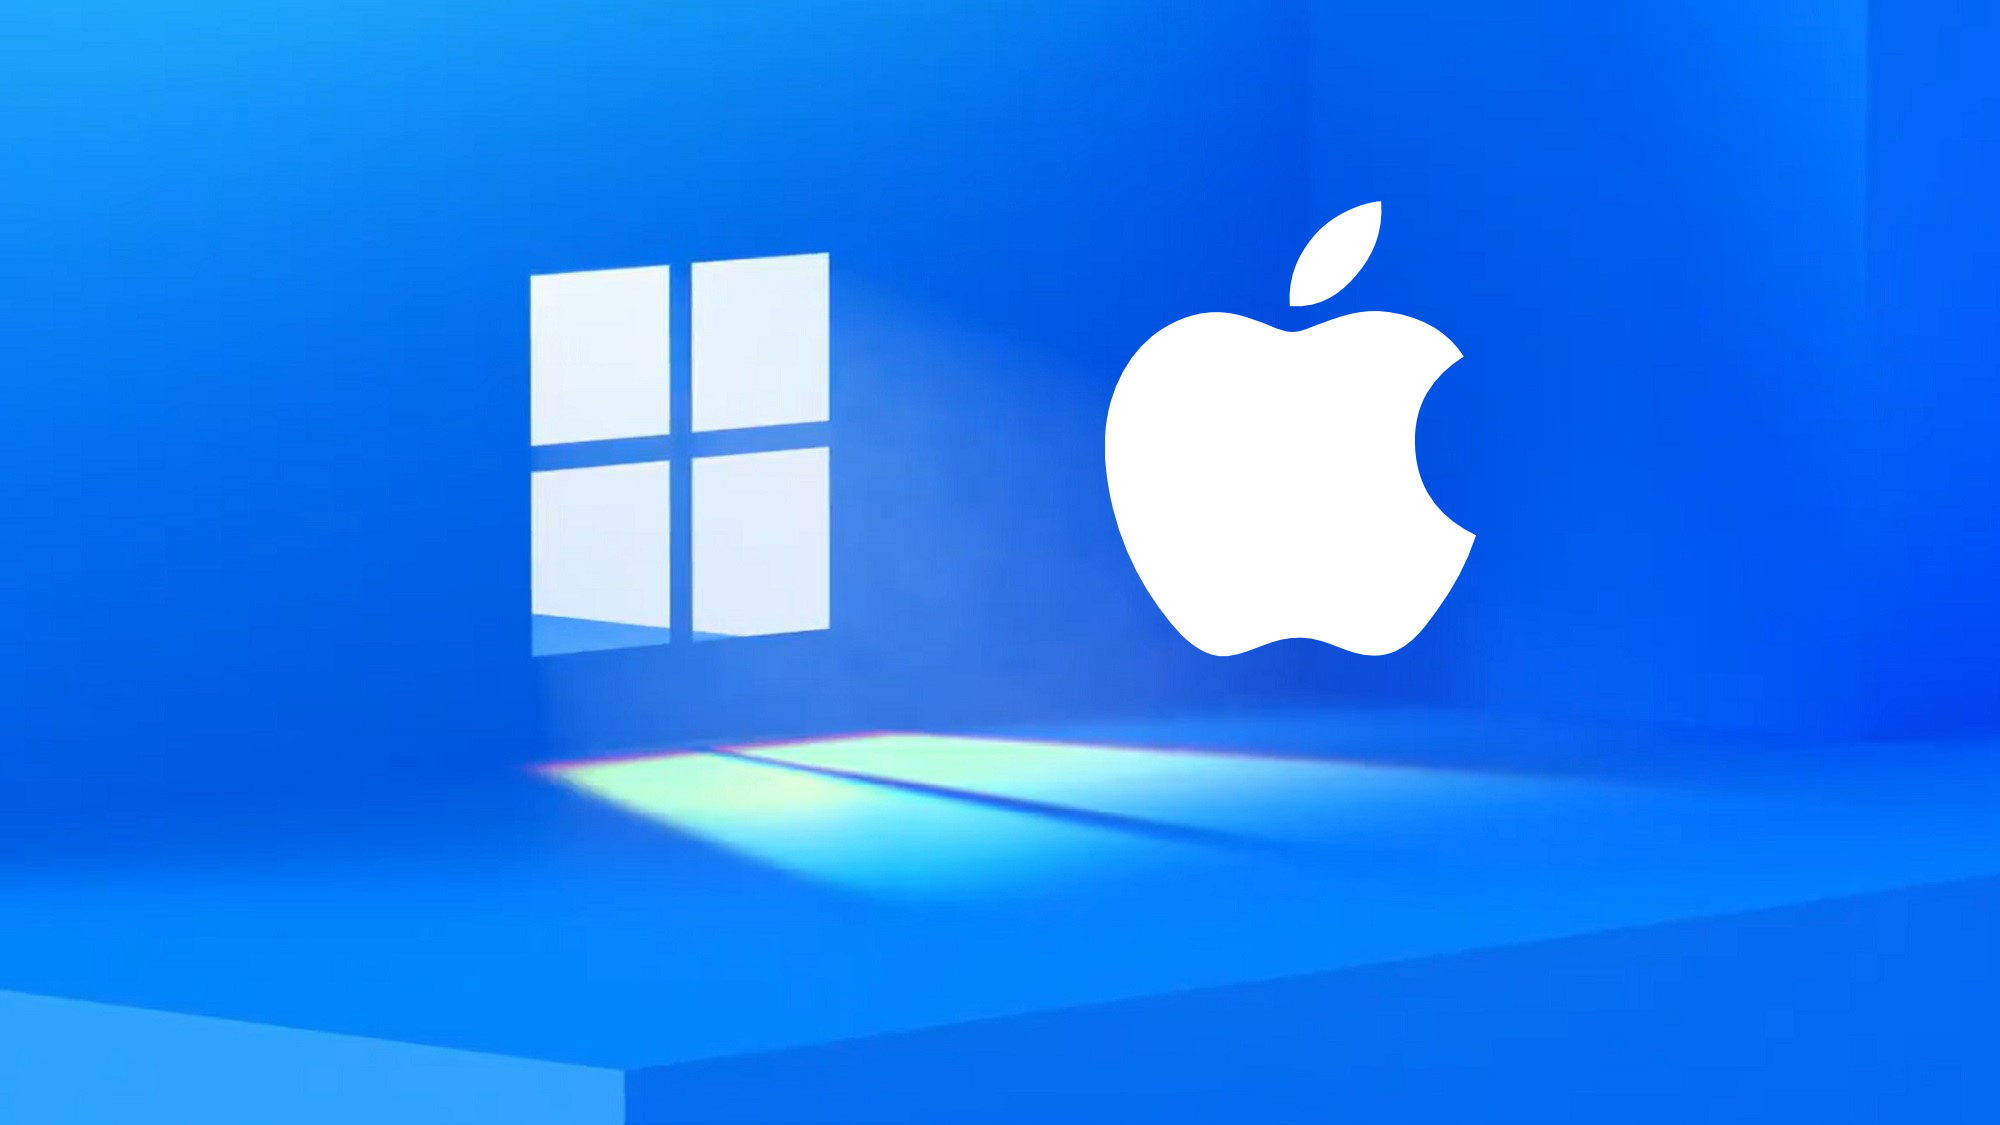 Apple and Microsoft Developers Conferences: Companies’ Strengths, Weaknesses